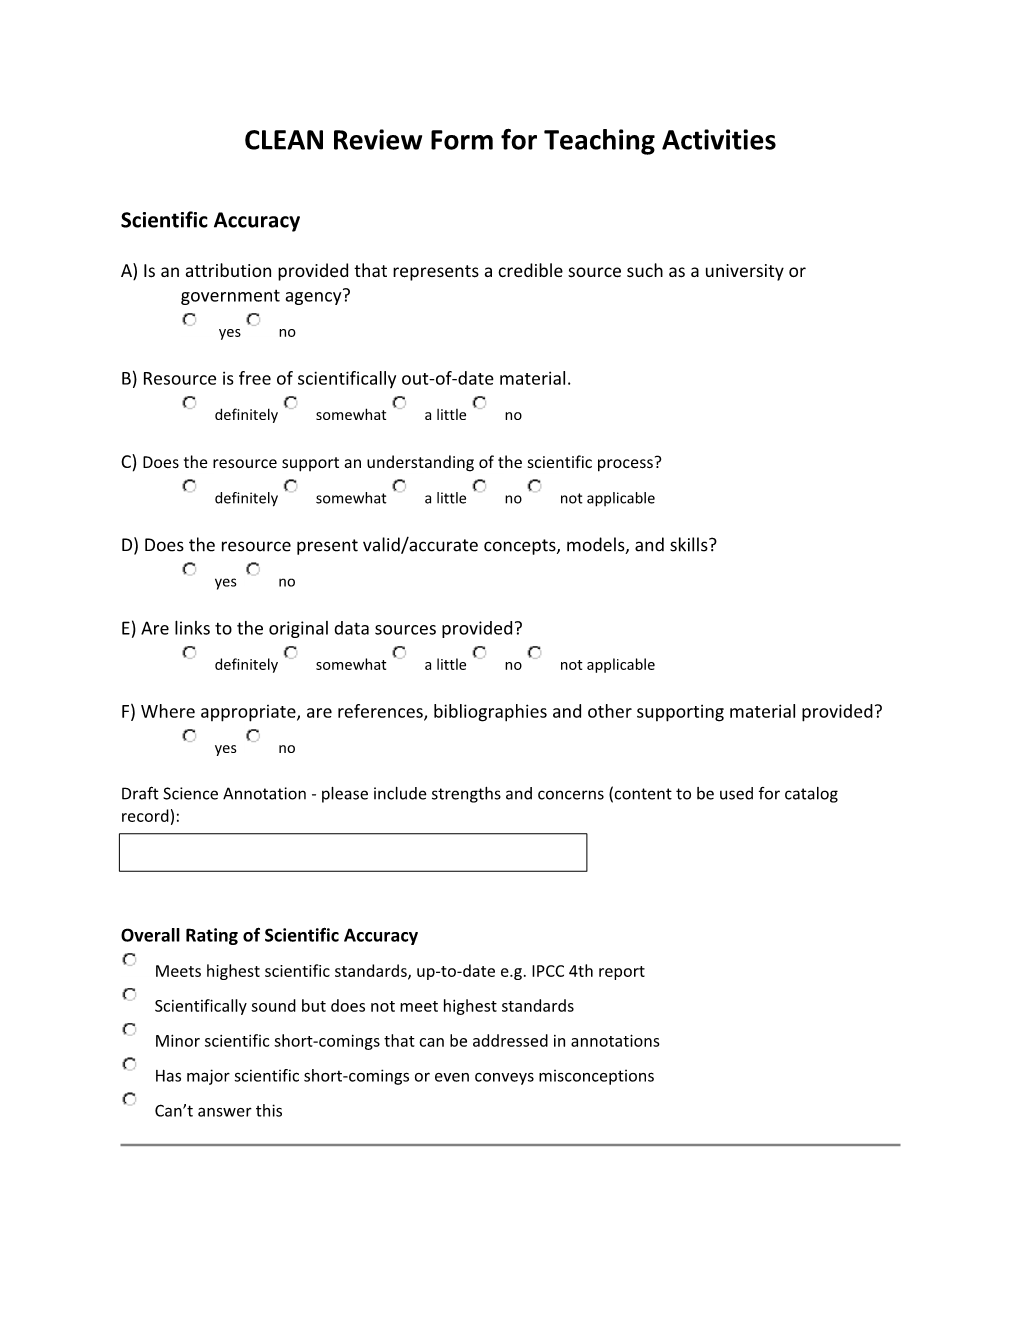 CLEAN Review Form for Teaching Activities